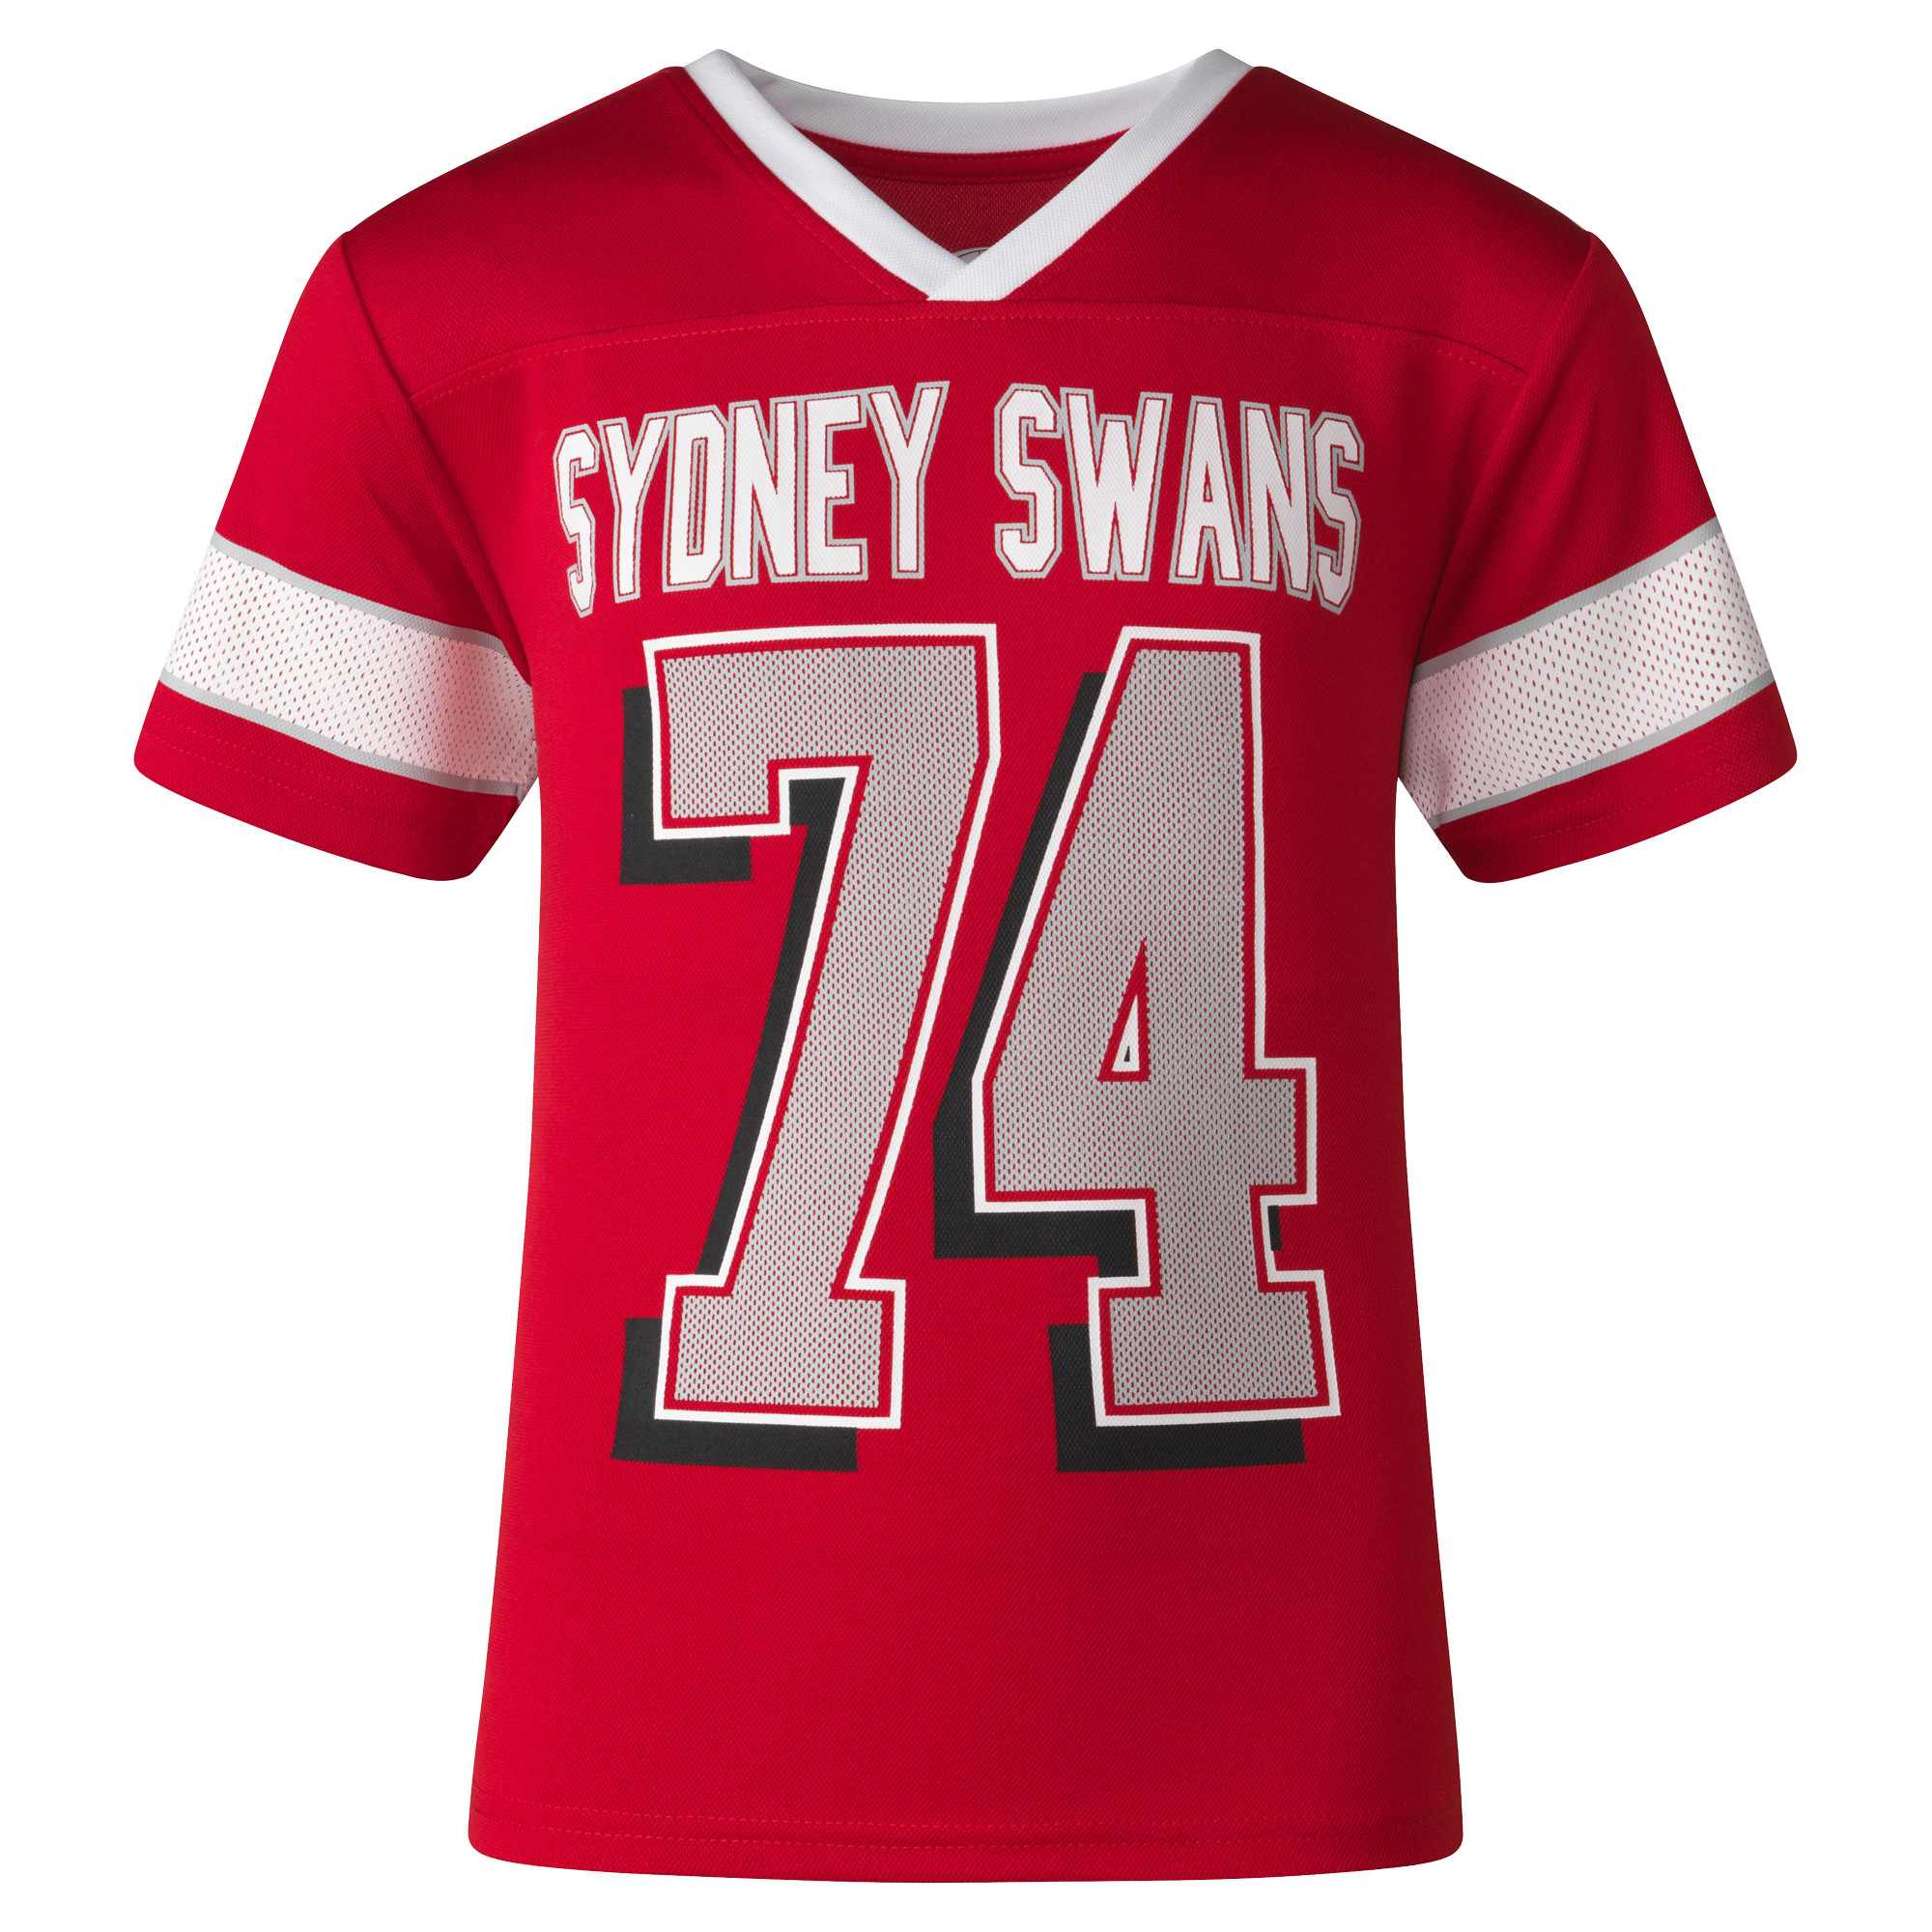 Sydney Swans Youth Football Top